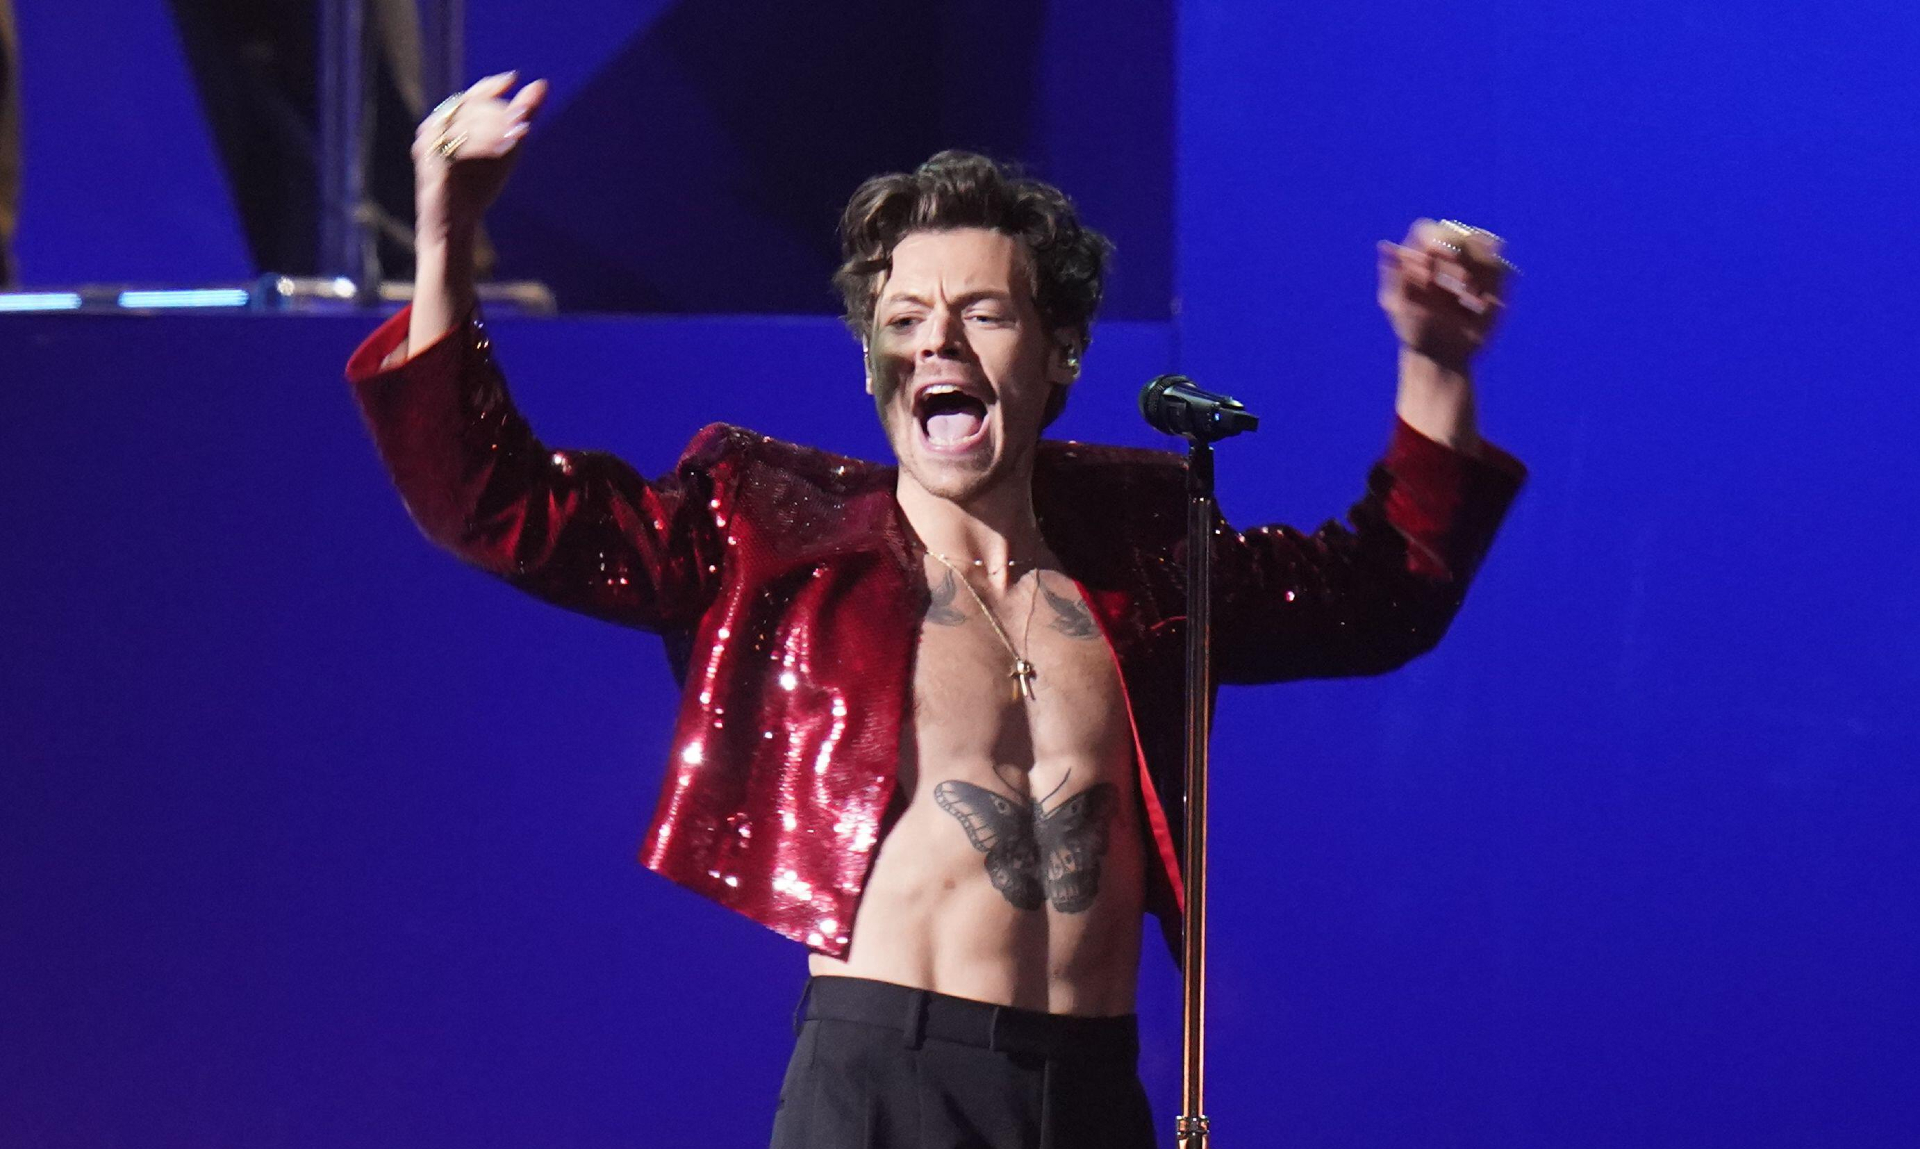 Harry Styles in concert, 11-02-2023. Image: PA Images / Alamy